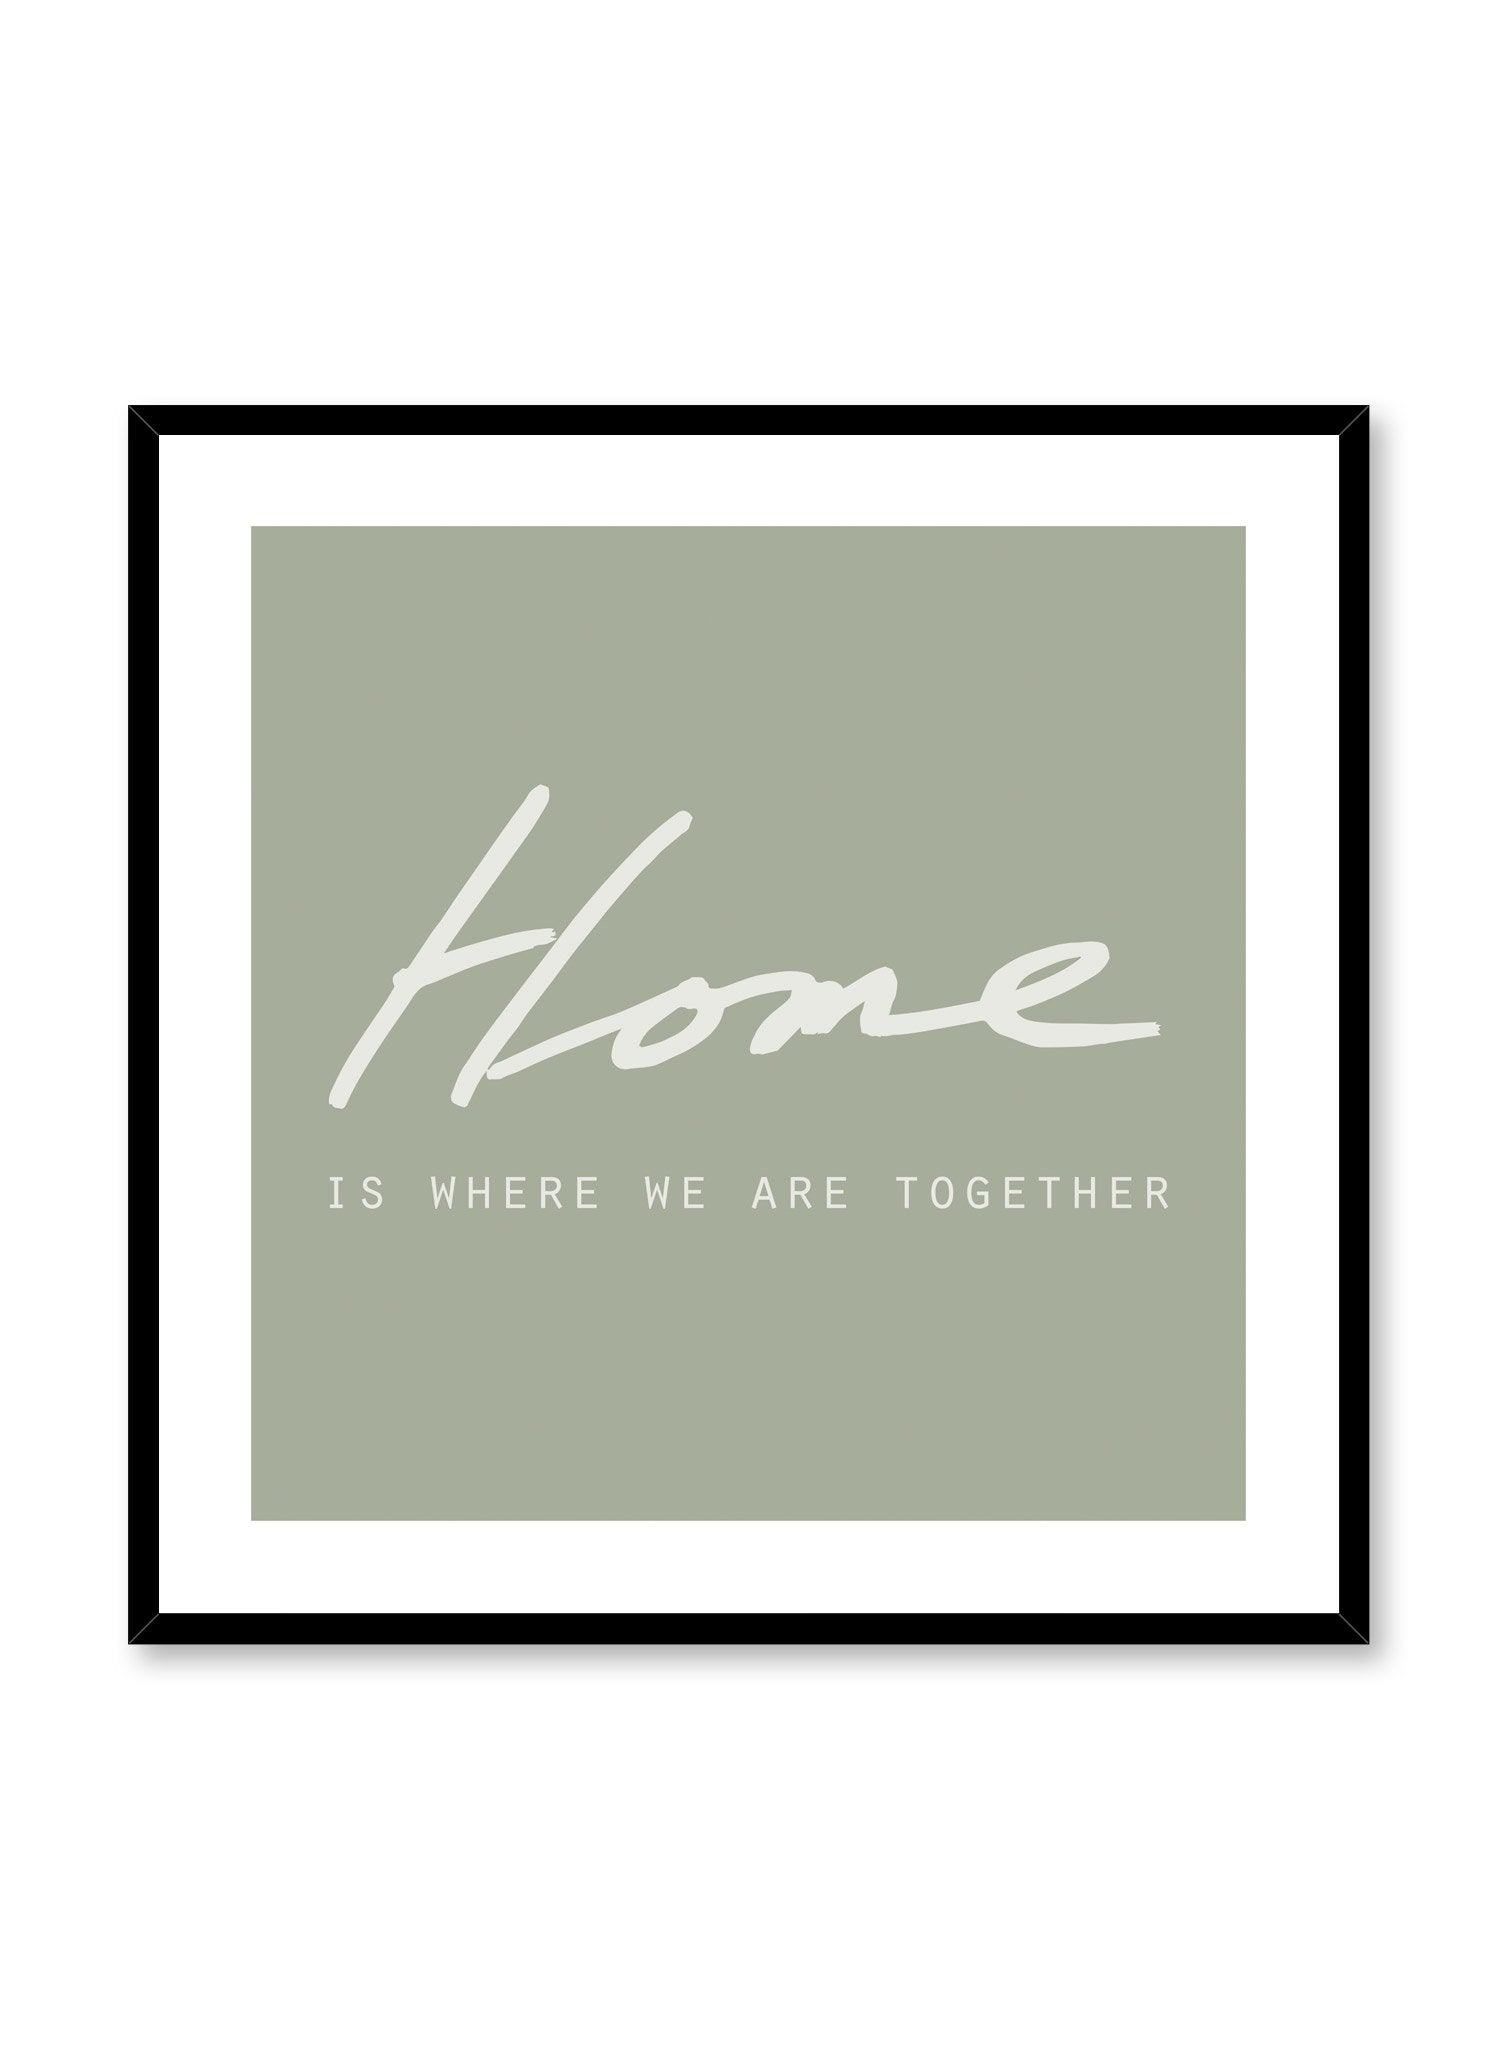 Scandinavian poster with black and white graphic typography design of home is where we are together in green by Opposite Wall